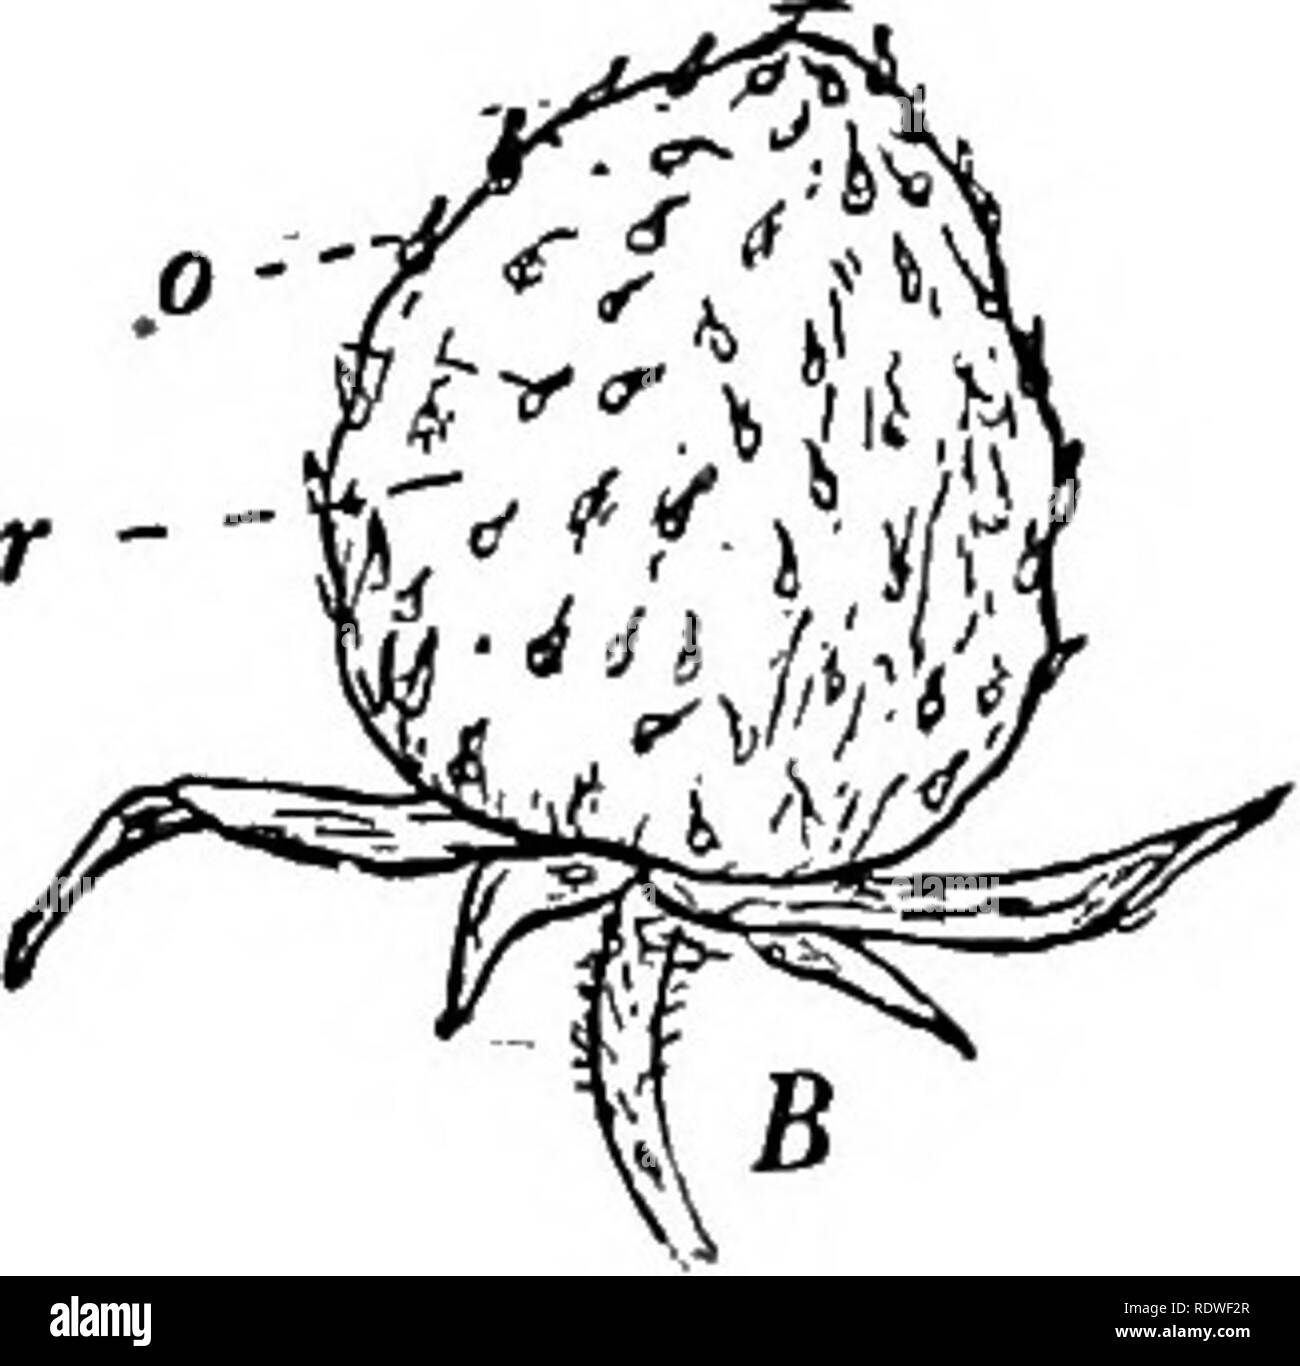 . Botany, with agricultural applications. Botany. Fig. 79. — Flower and fruit of Strawberry. A, section through flower, showing the fleshy receptacle {r) and the many pistils (p) on its surface. B, fruit consisting of enlarged receptacle (r), bearing the small hard ovaries (o). which they are closely joined form the rind. (Fig. 78.) The placentas are more or less fleshy and in case of the Watermelon, where they form large juicy lobes, they constitute the bulk of the edible portion. In most cases, however, as Muskmelons and Pumpkins illustrate, the placentas break loose from the ovary wall and  Stock Photo